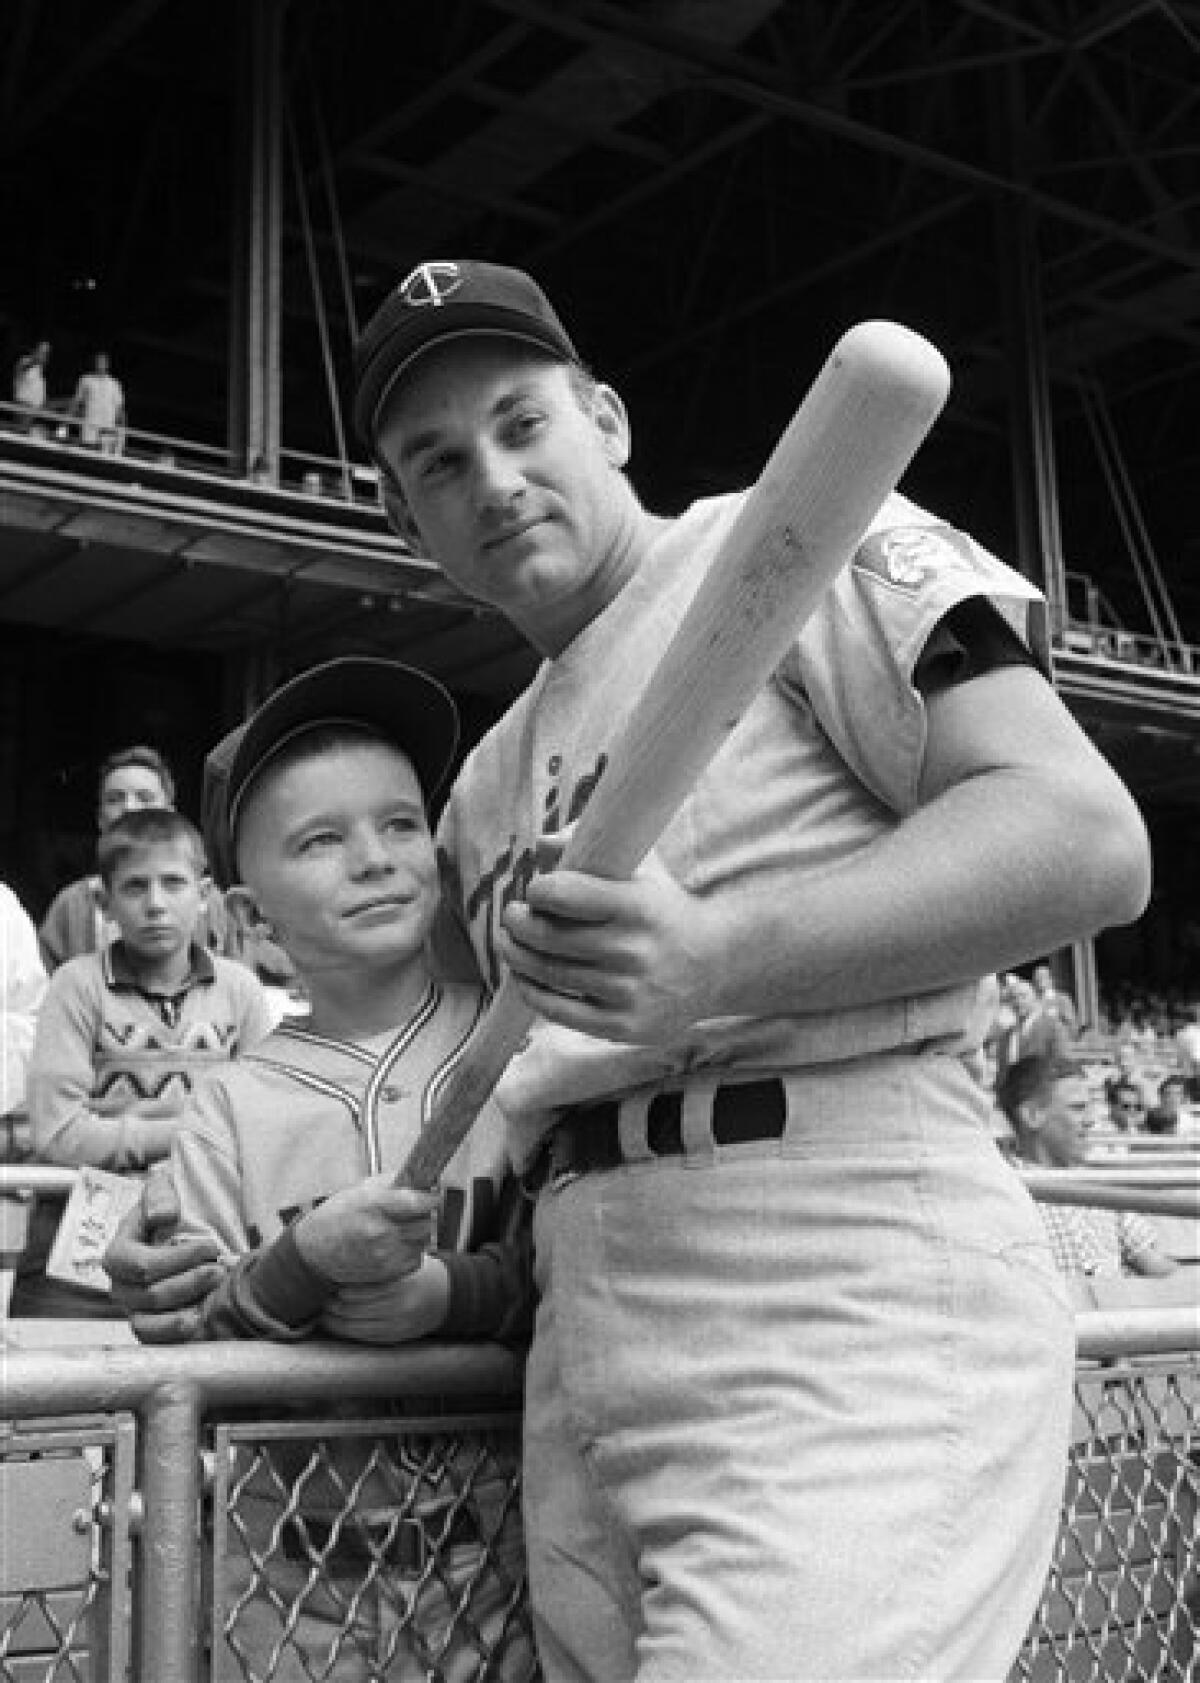 Harmon Killebrew ends fight with cancer, looks to hospice care